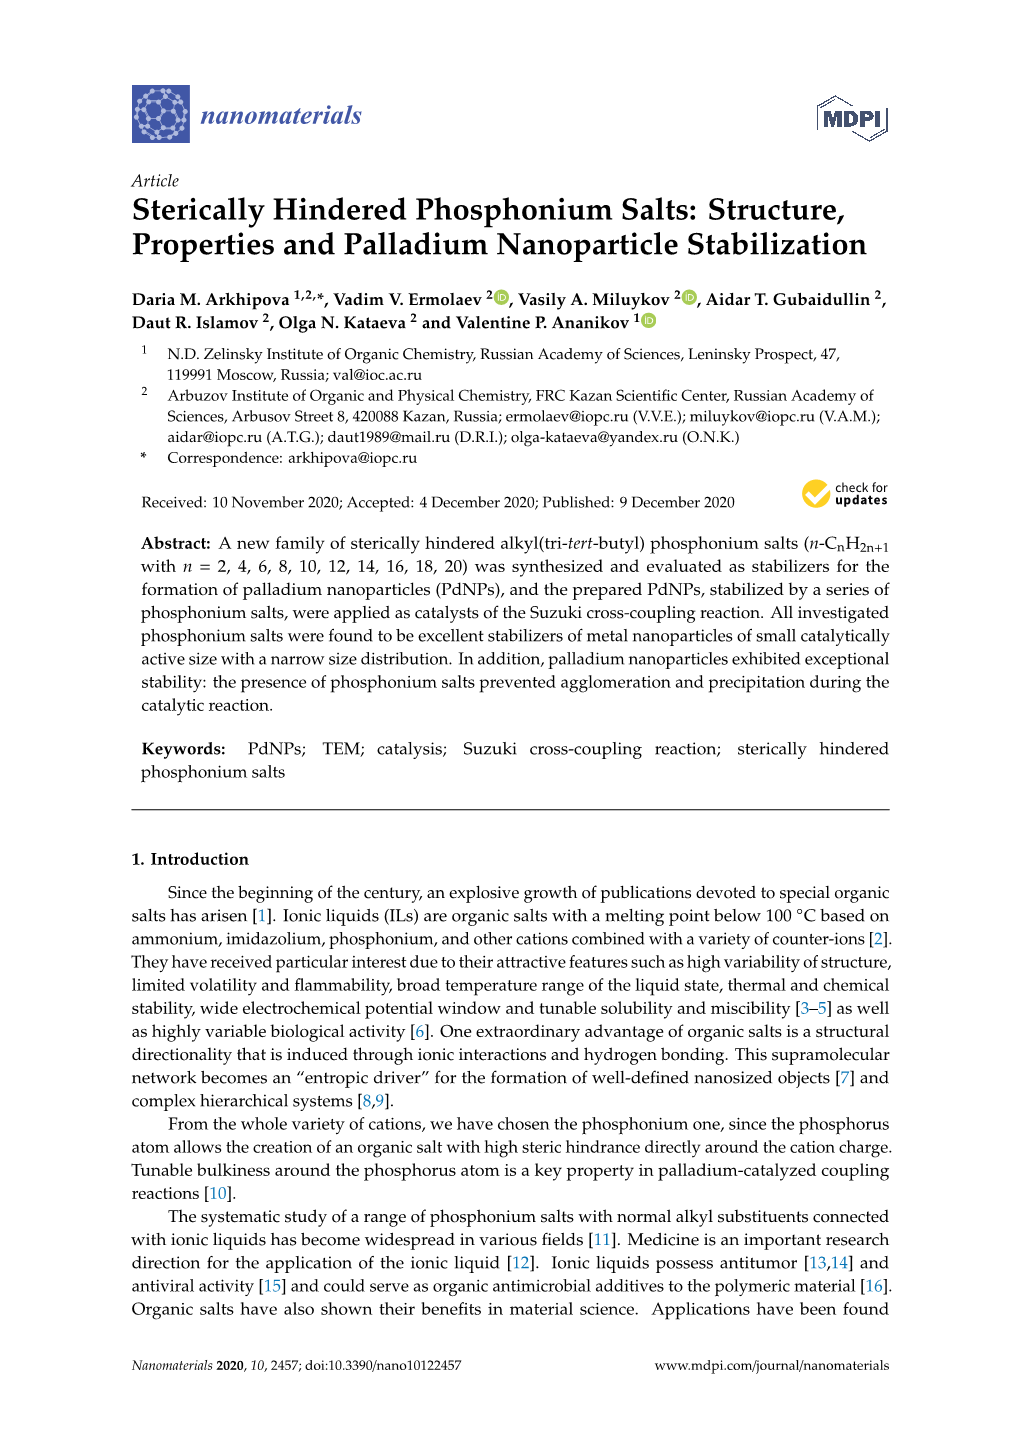 Sterically Hindered Phosphonium Salts: Structure, Properties and Palladium Nanoparticle Stabilization